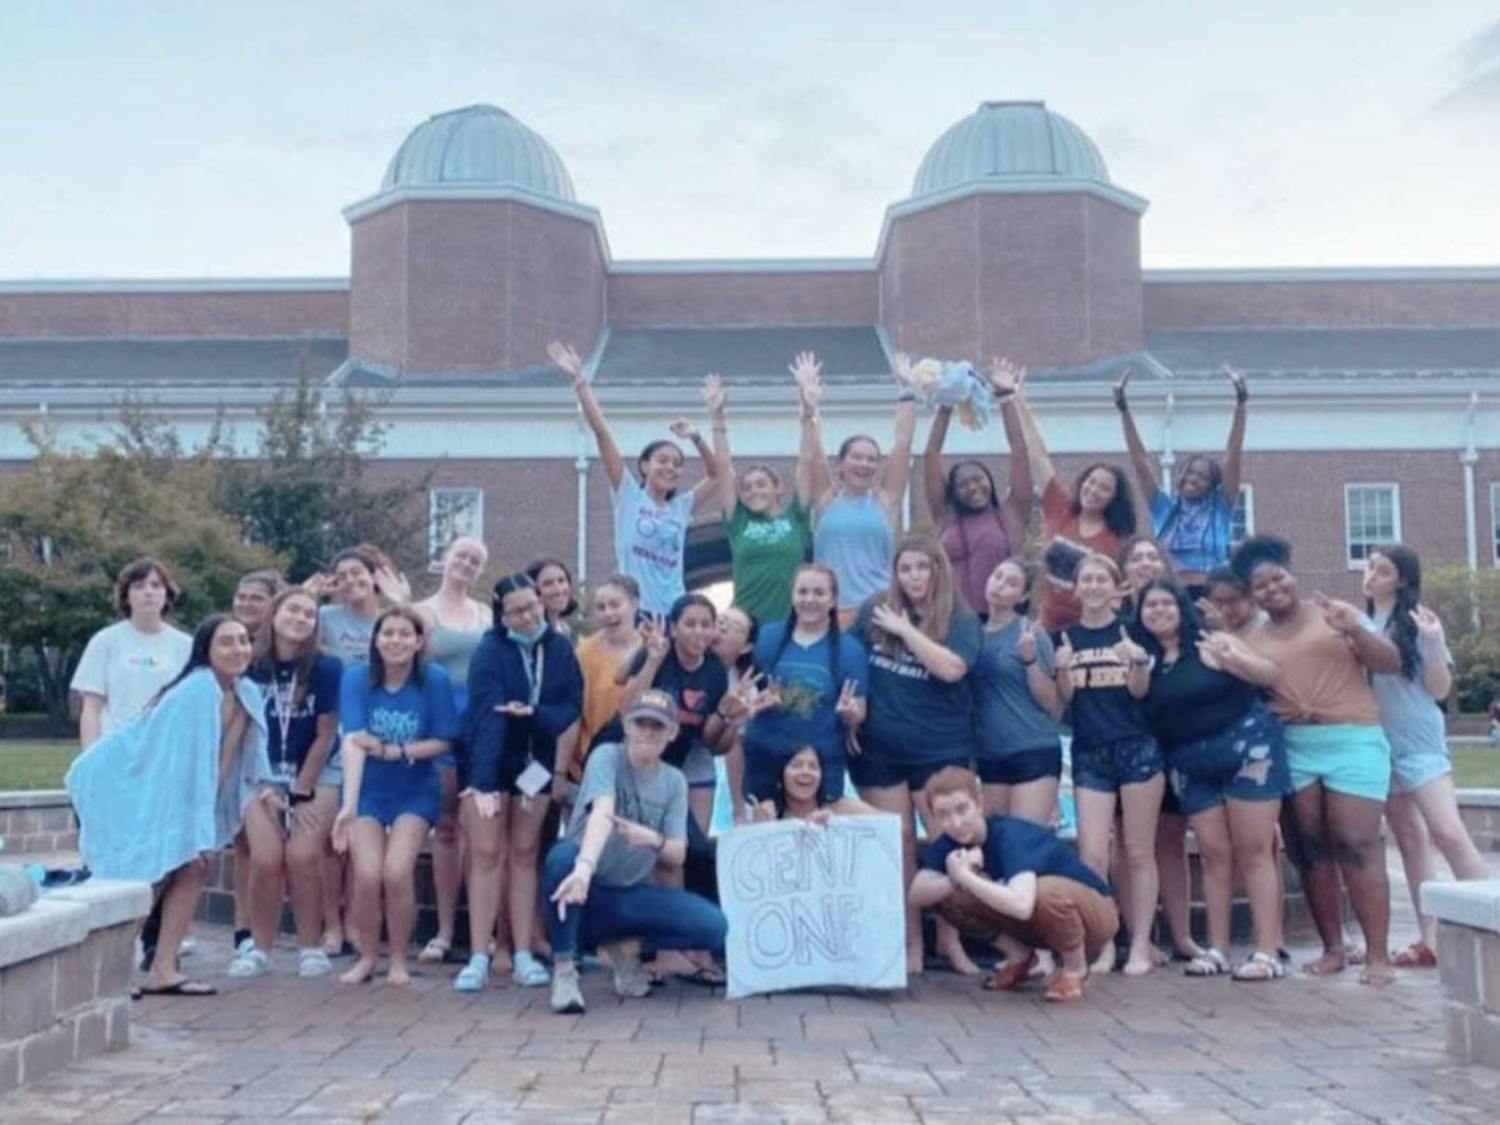 Kates and the rest of her floor in Centennial celebrate jumping in the fountain (Photo courtesy of Hannah Kates).